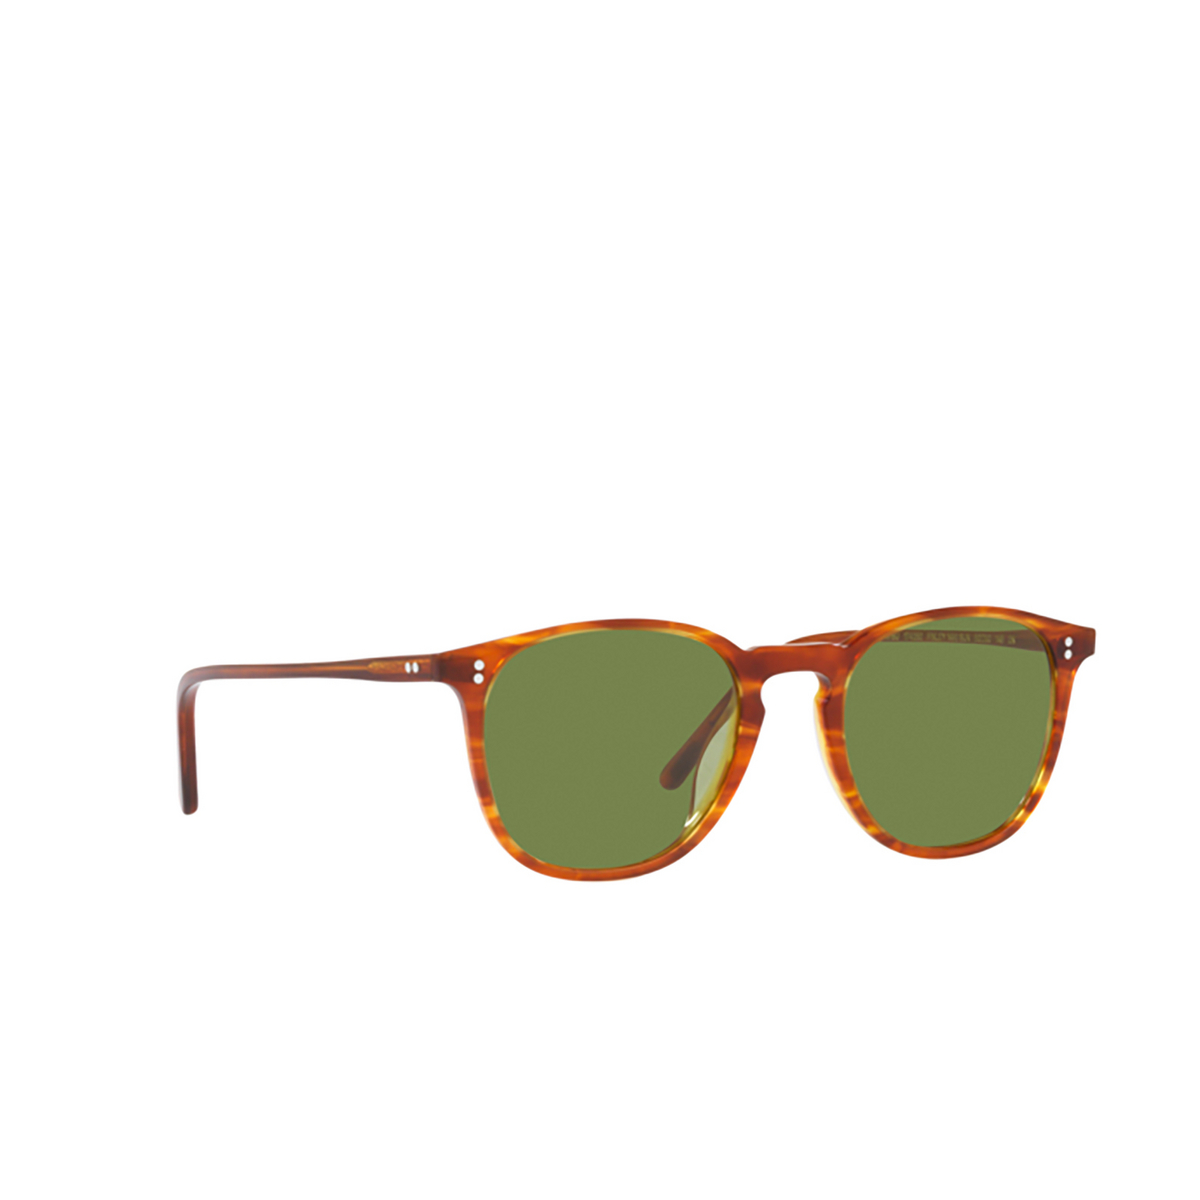 Oliver Peoples FINLEY 1993 Sunglasses 174252 Sugi Tortoise - three-quarters view